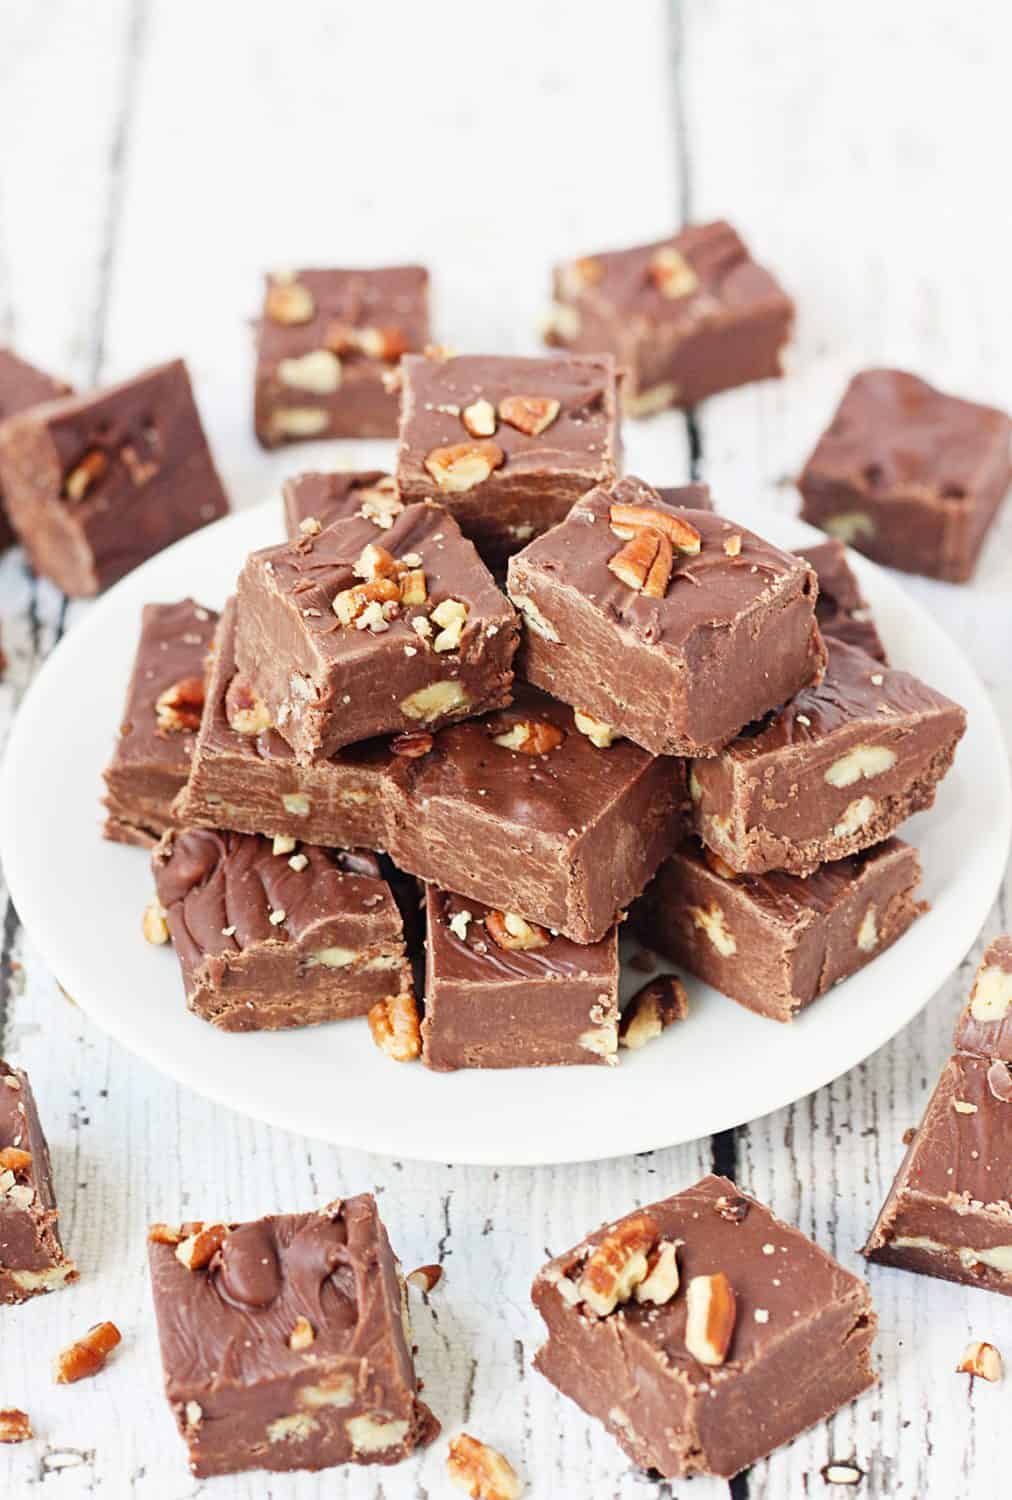 Grammy's Easy Homemade Fudge -- My grammy's easy homemade fudge is seriously the best! It's super creamy and super chocolaty, plus it takes only 10 minutes to make and doesn't require any candy-making skills!